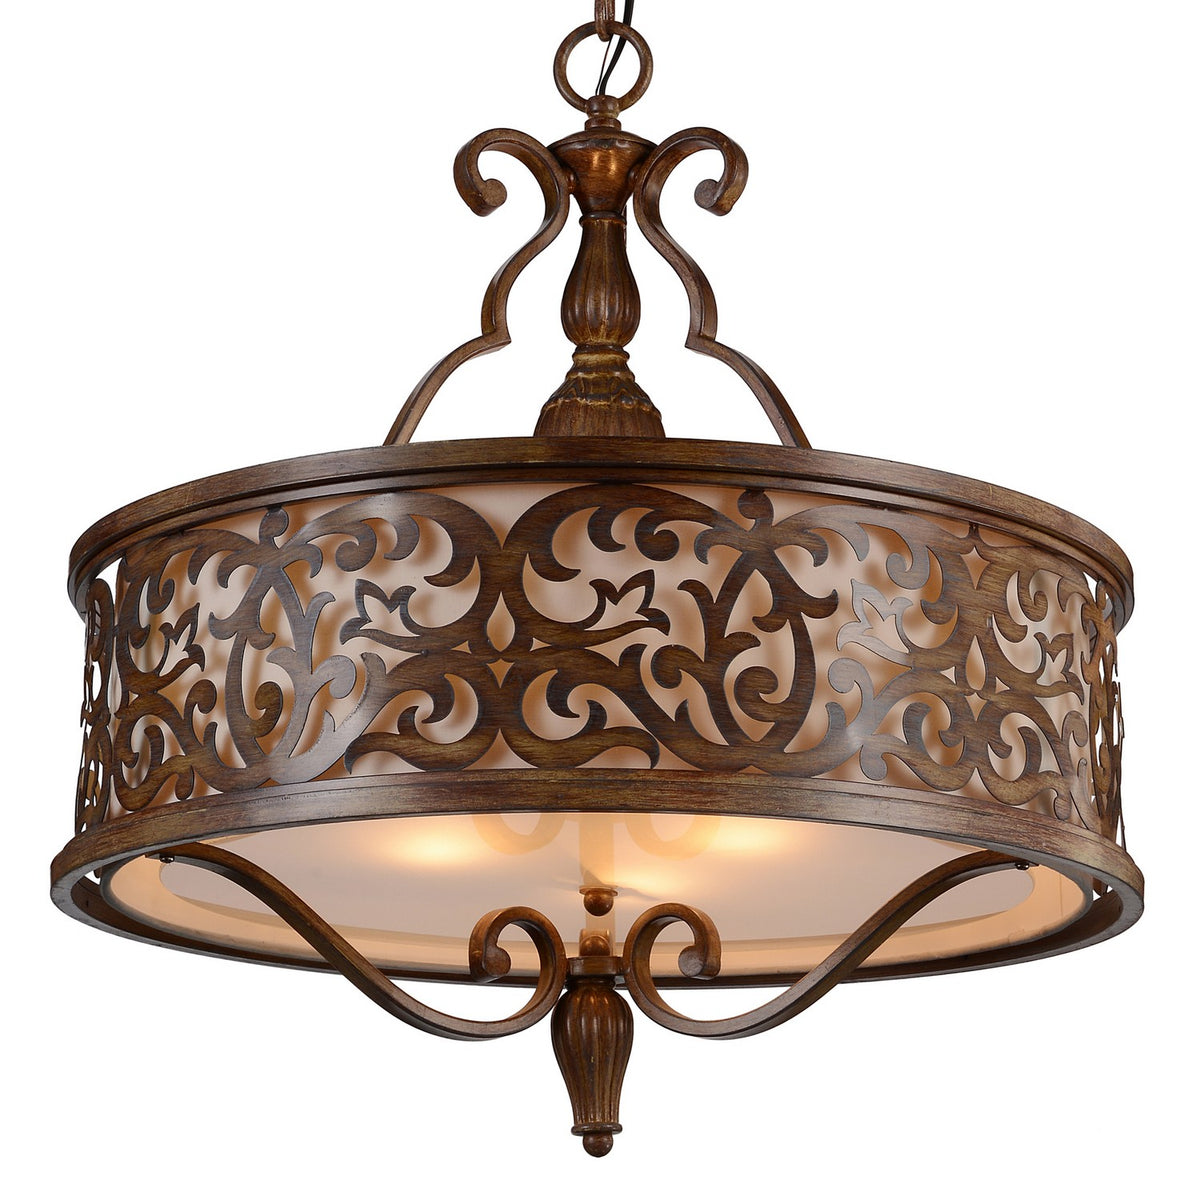 CWI Lighting - 9807P21-5-116-A - Five Light Chandelier - Nicole - Brushed Chocolate